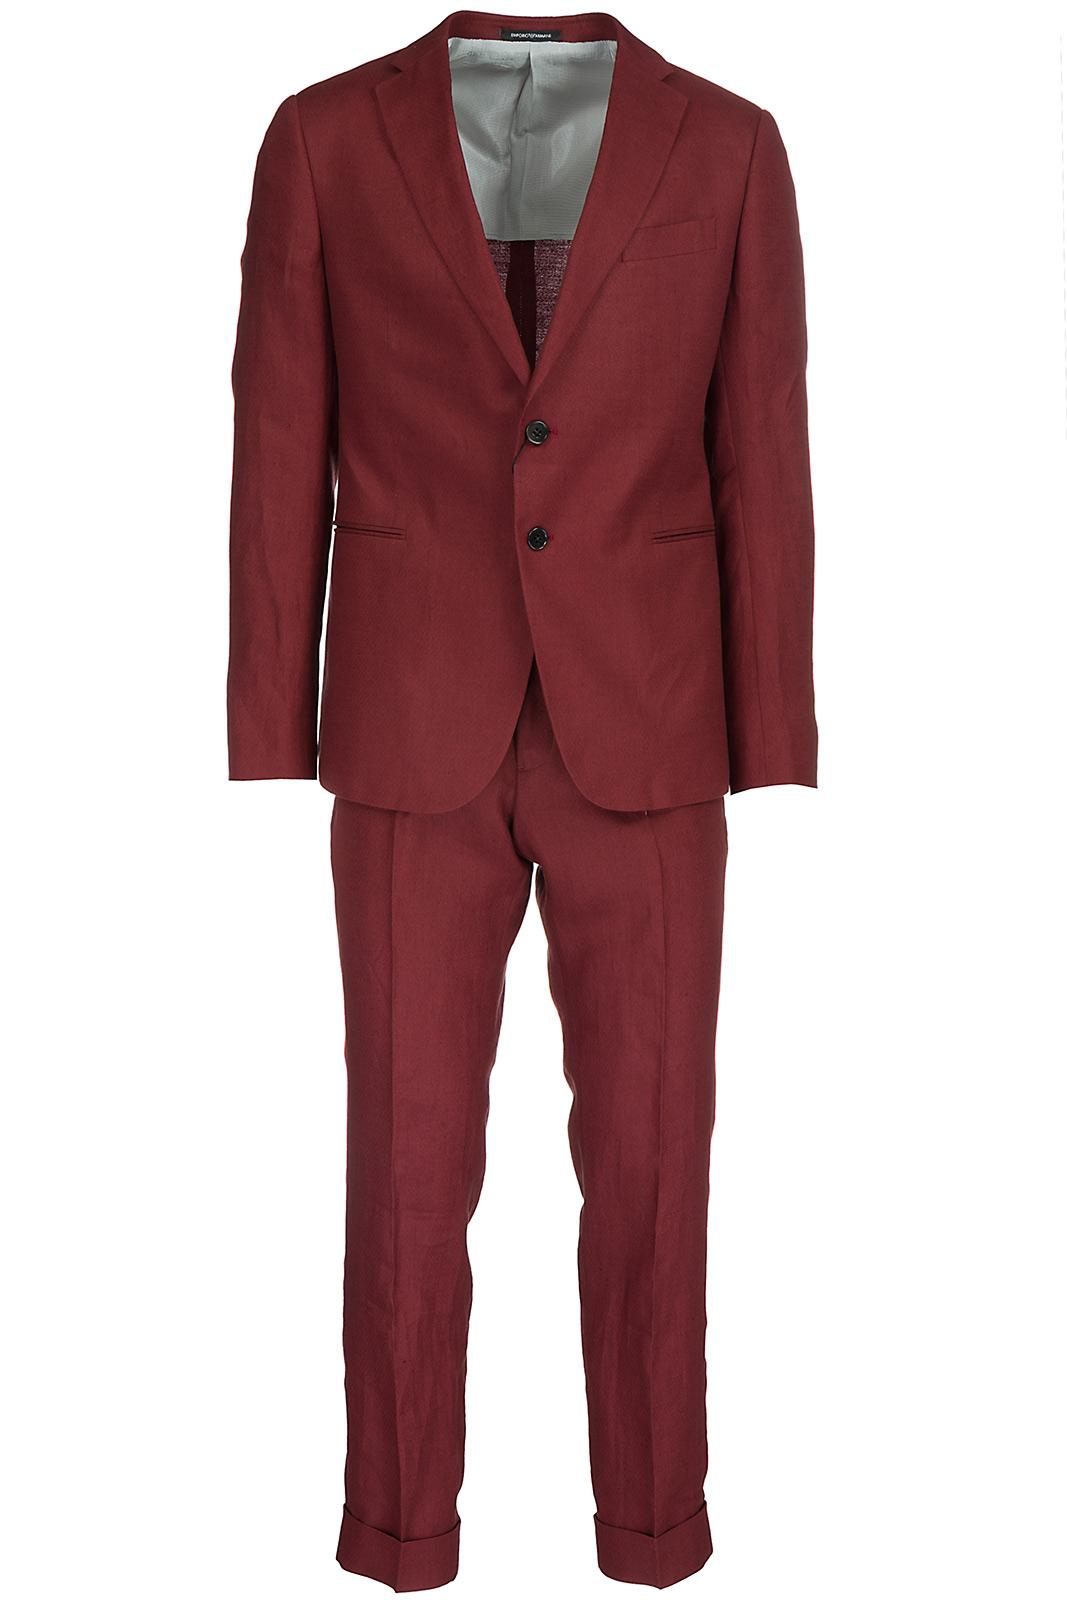 armani red suit